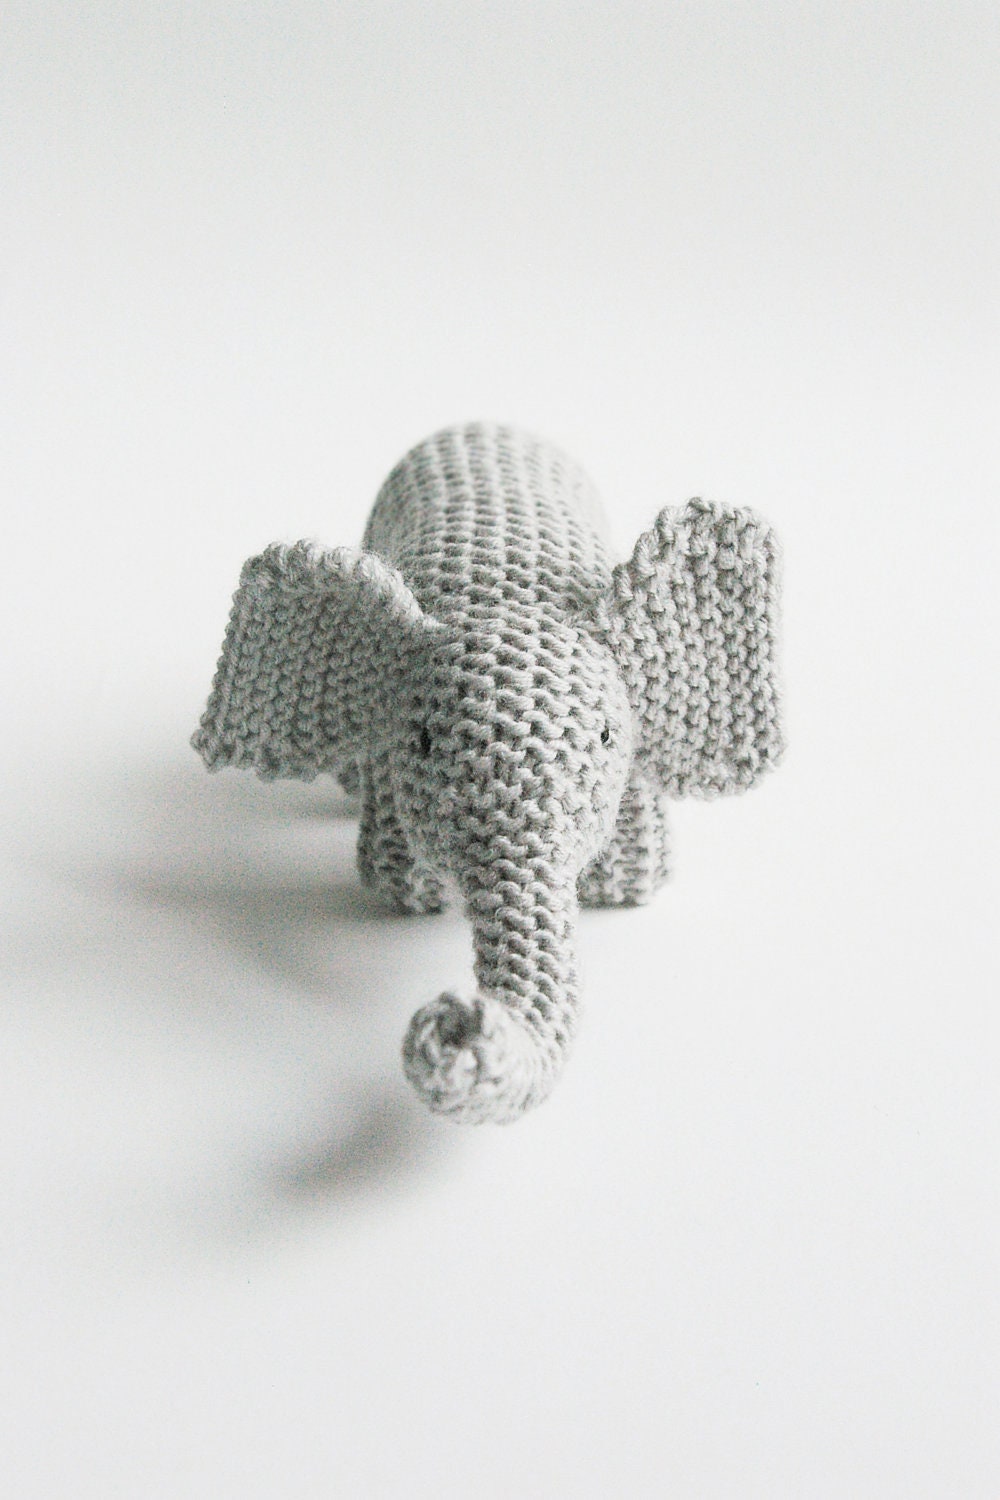 knitted toy MY FRIEND ELEPHANT / eco kids  / baby or toddler gift / made to order - Patricija